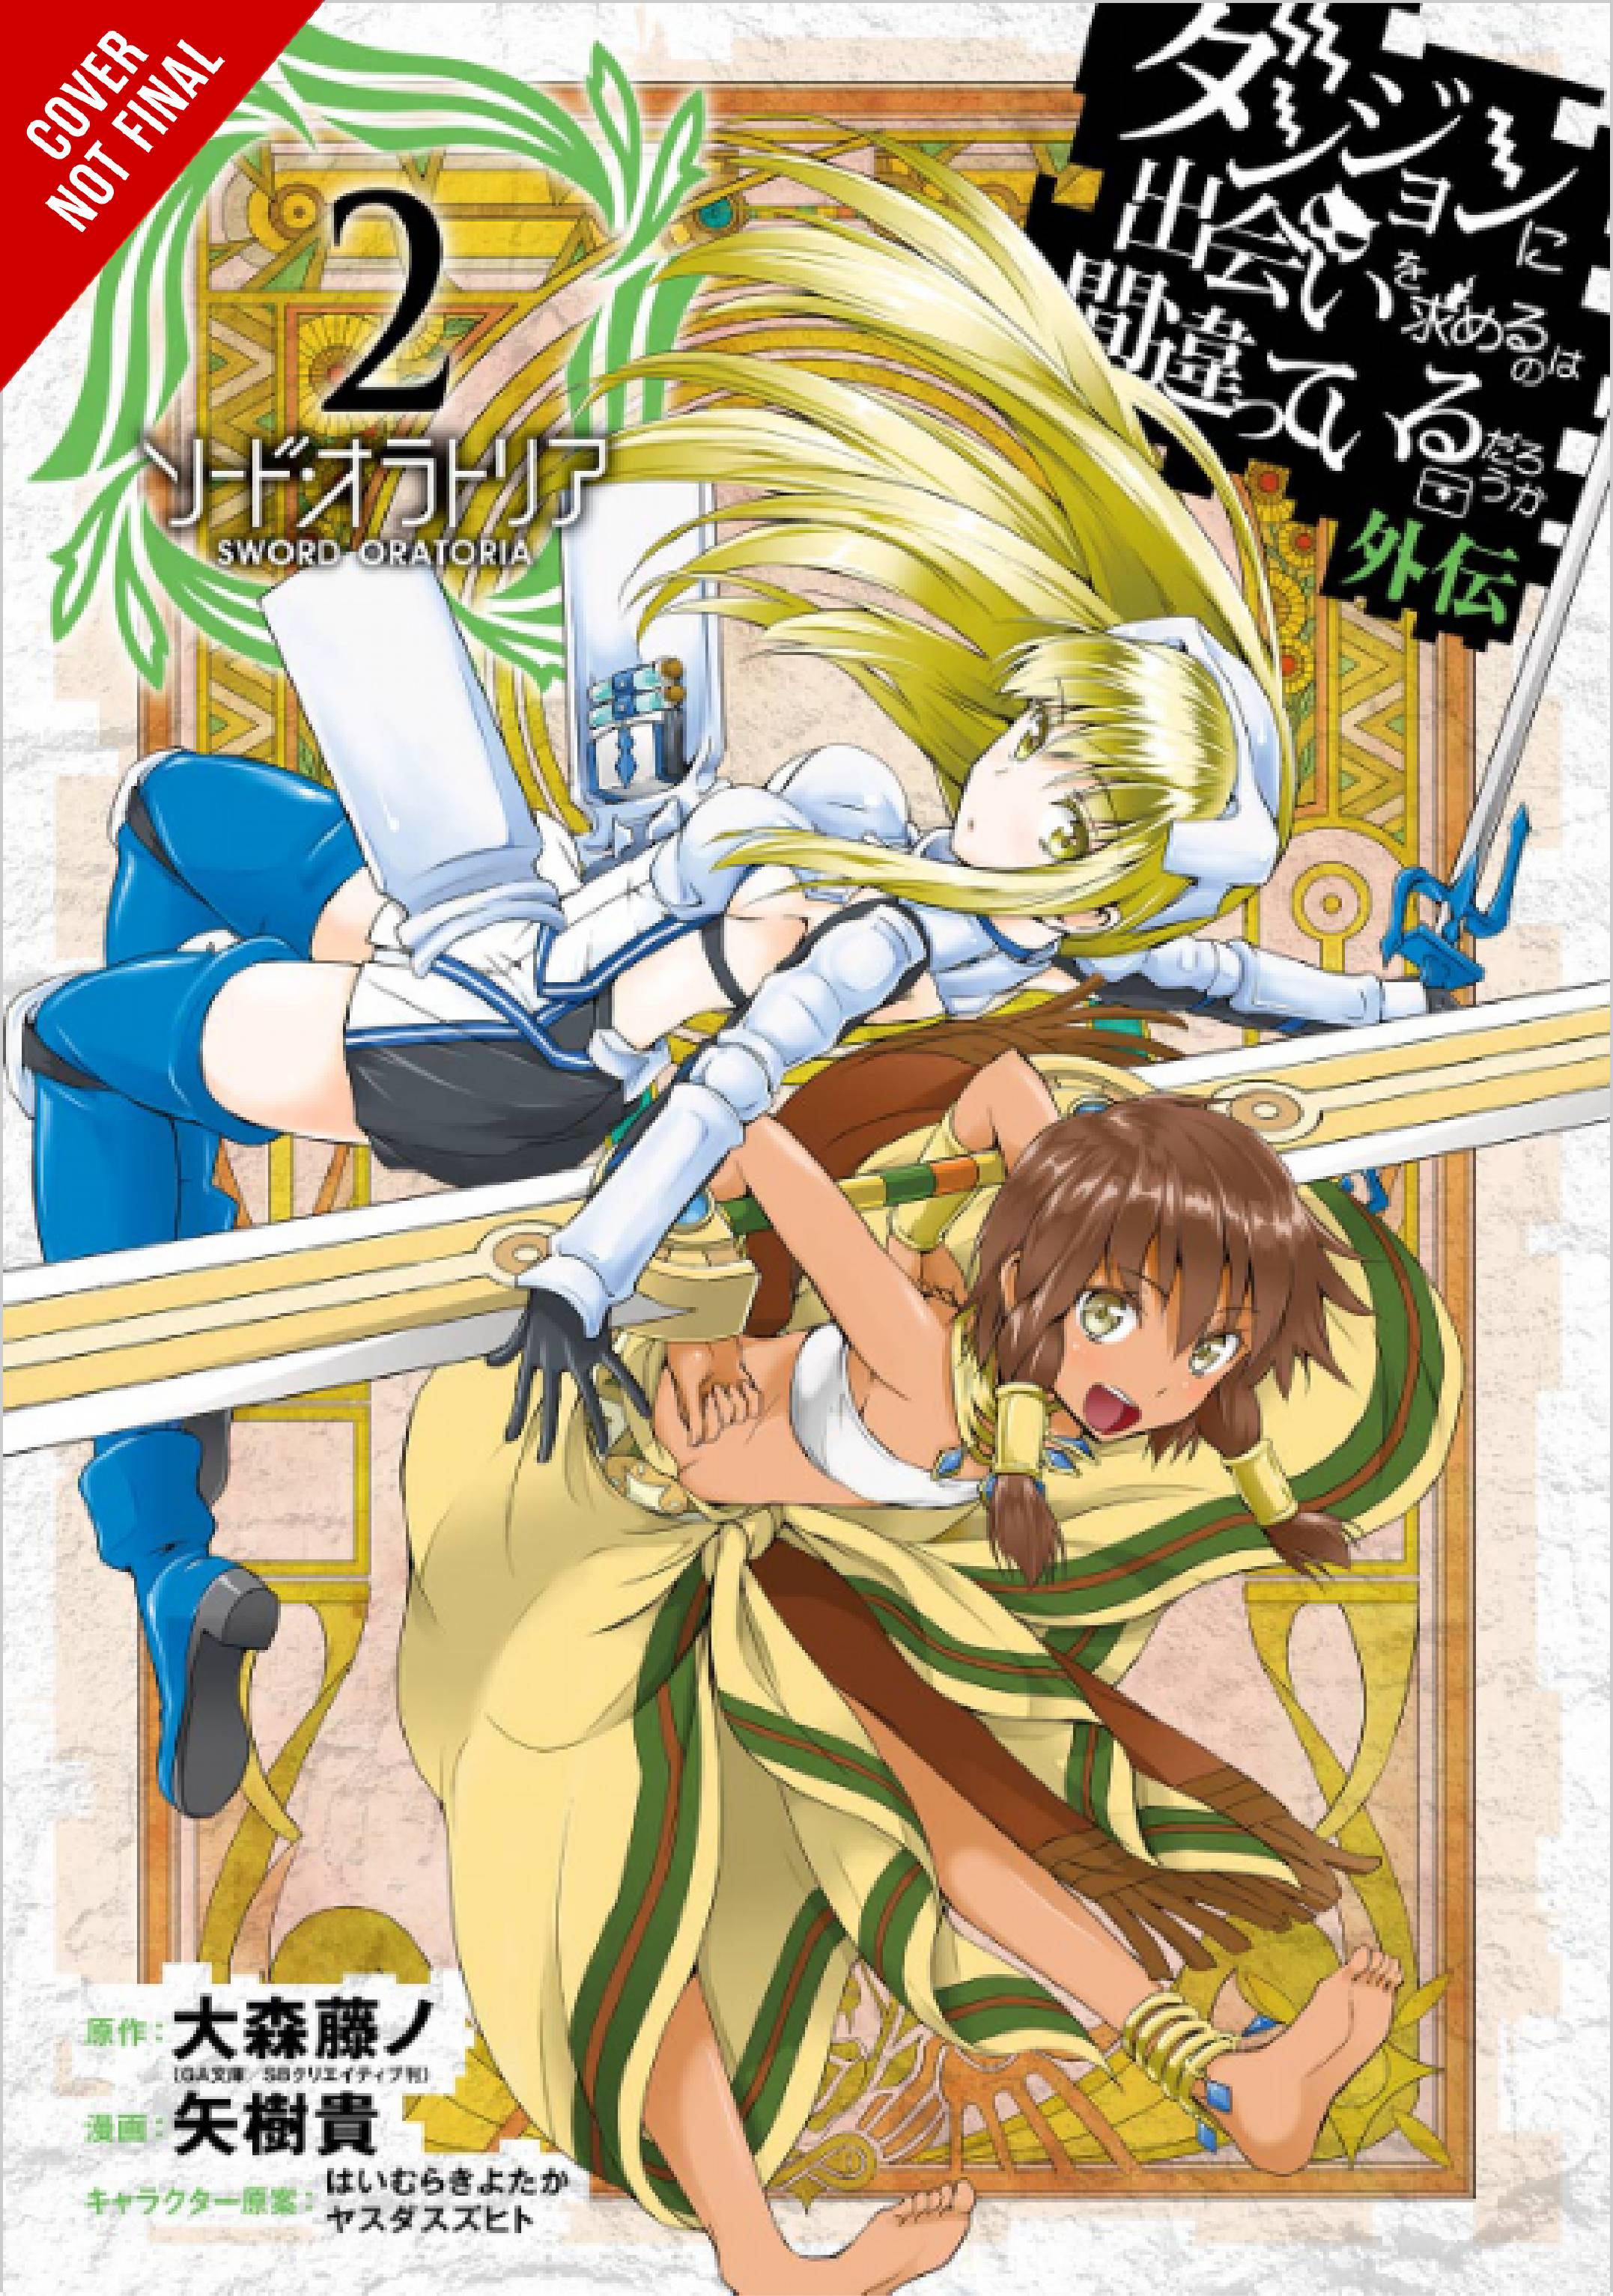 Is it Wrong to Pick Up Girls in a Dungeon Sword Oratoria Manga Volume 2